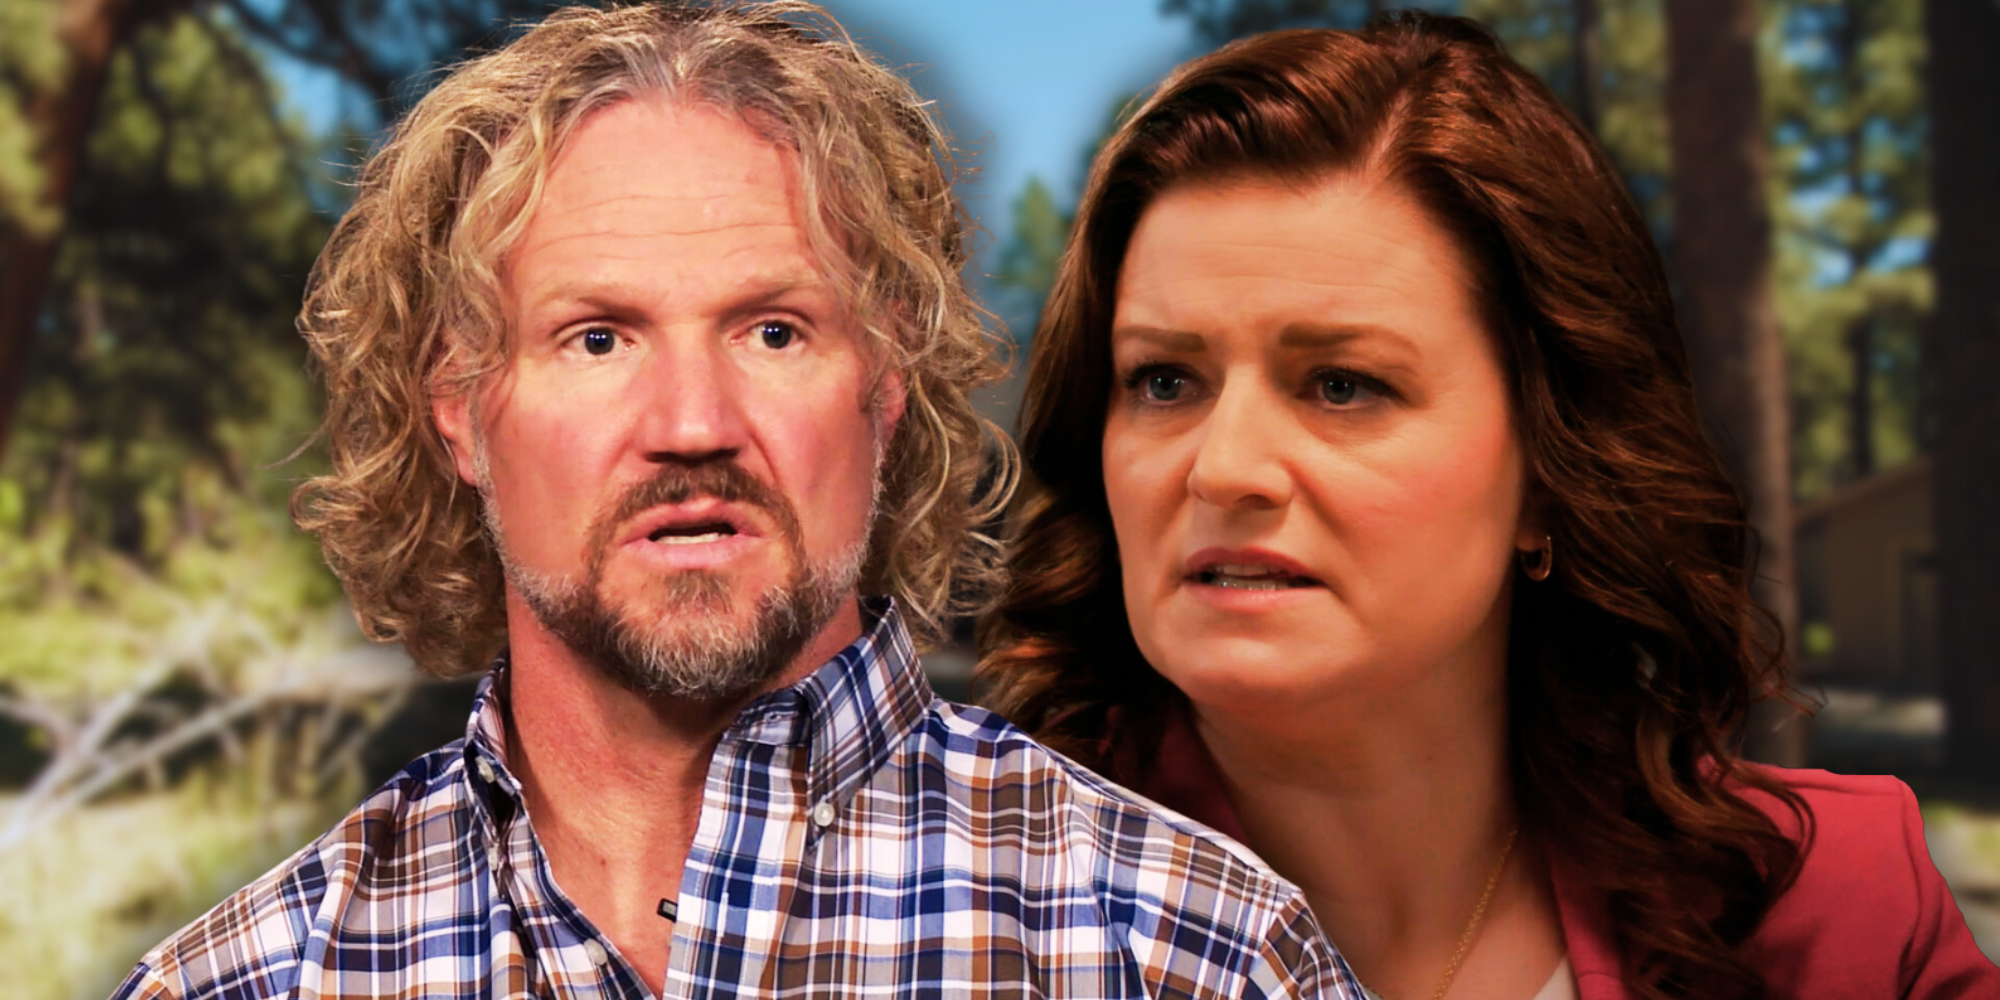 Sister Wives' Kody and Robyn Brown with outdoor background